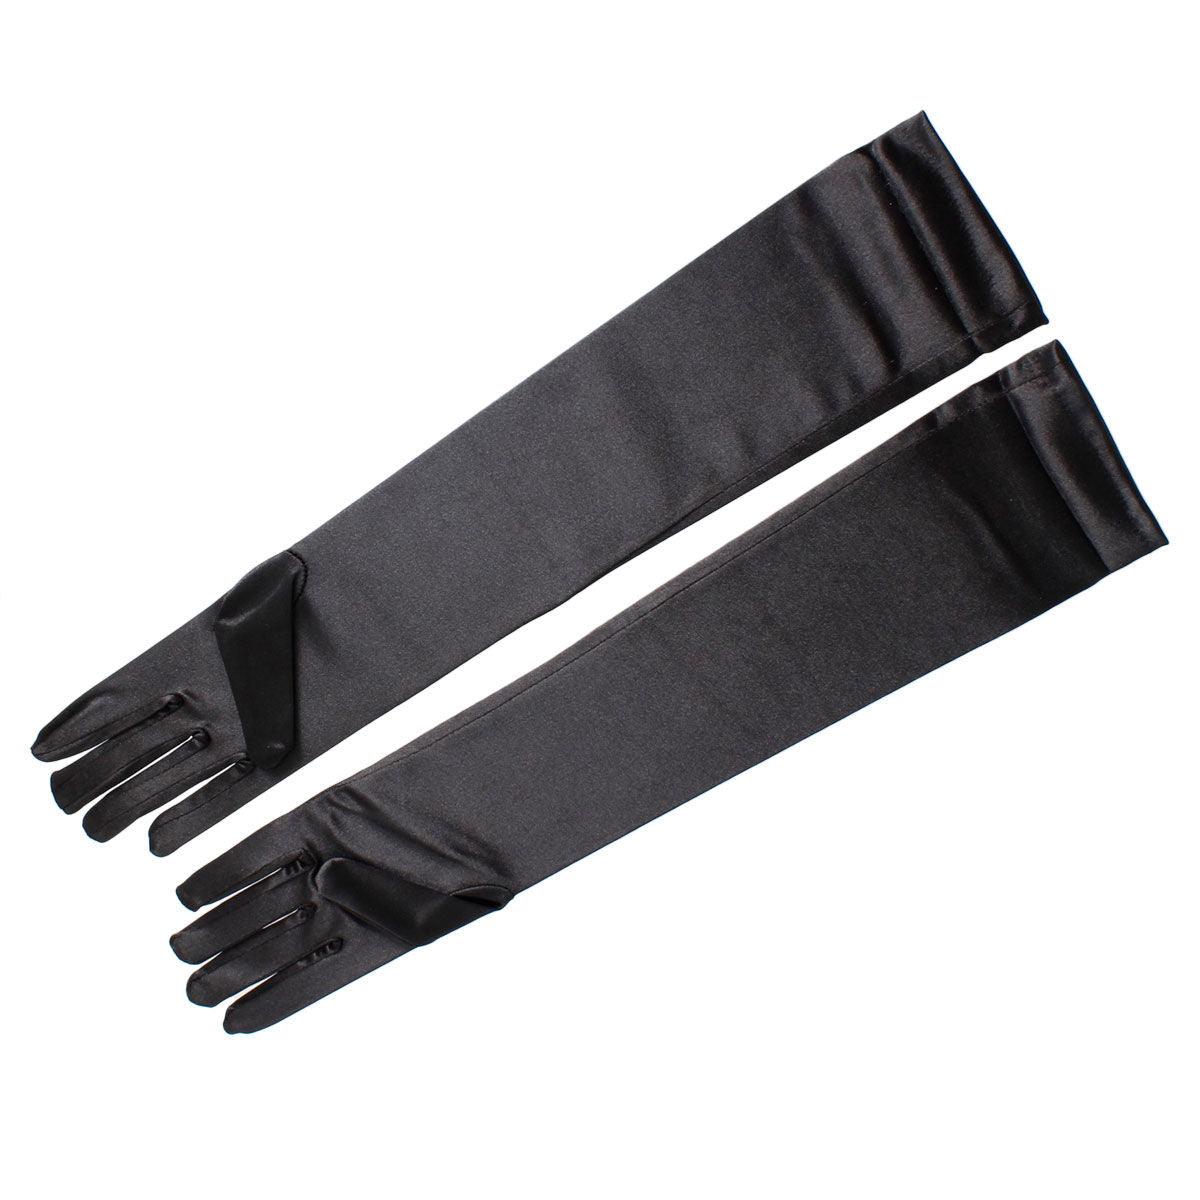 Sophisticated Long Satin Evening Gloves in Black